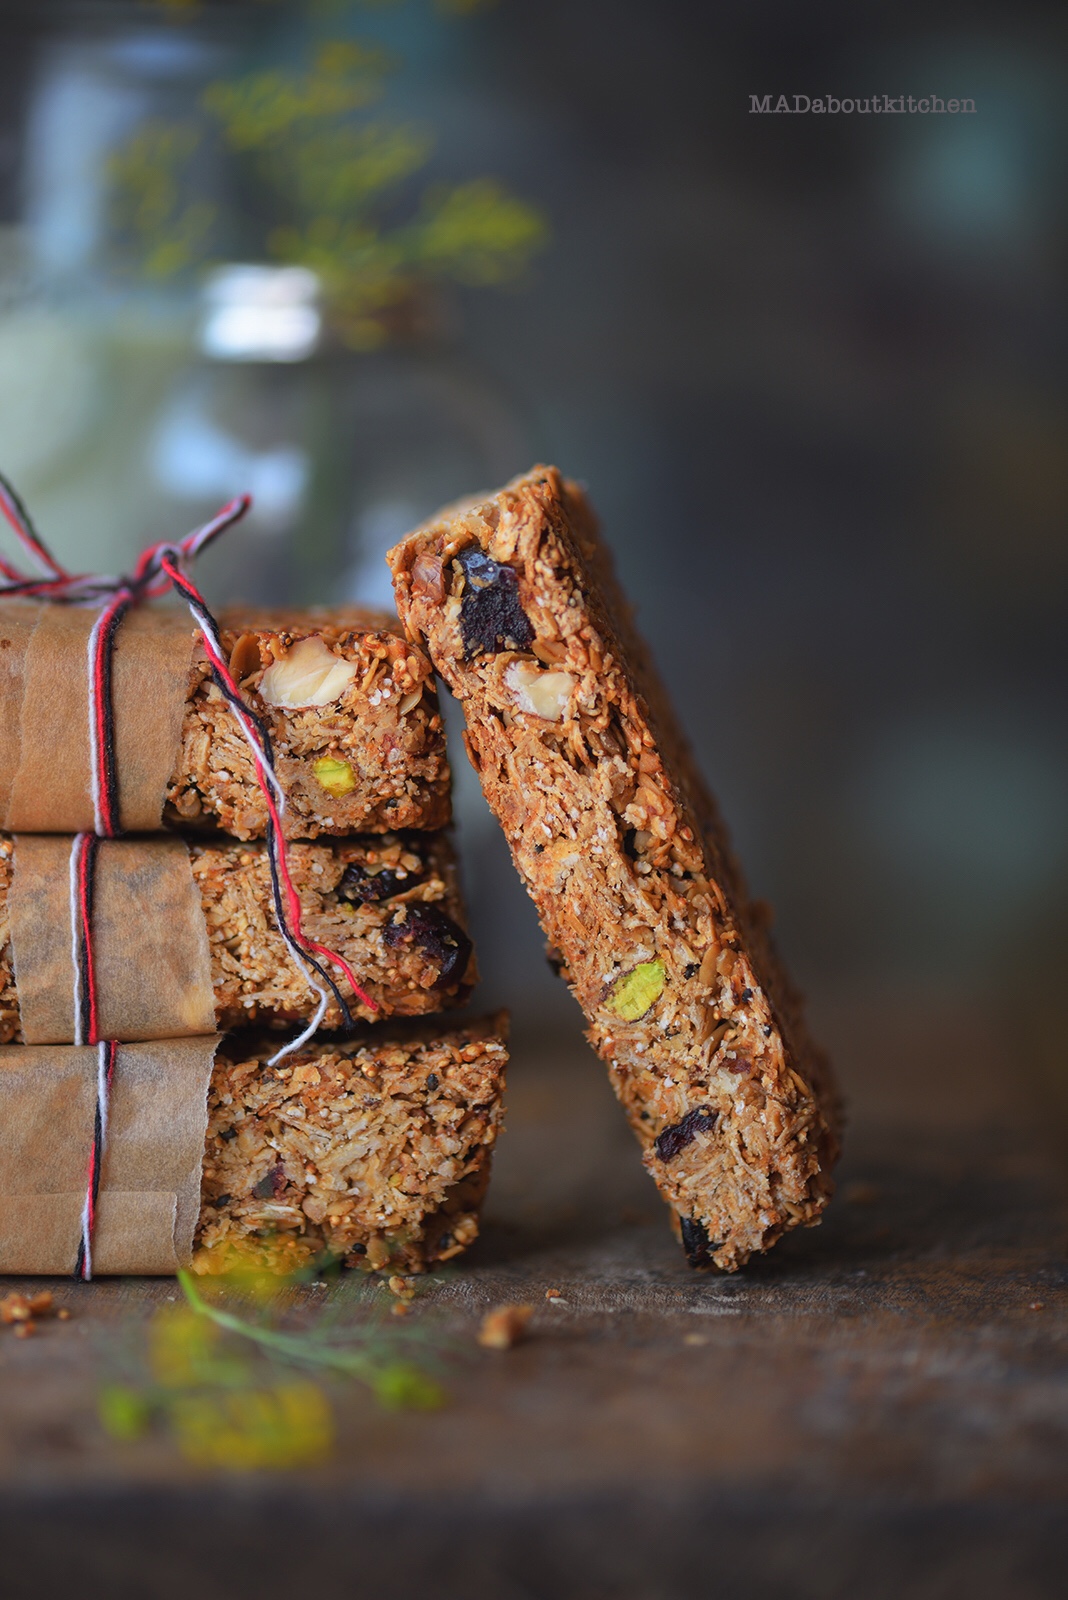 Make Homemade Granola bars with this simple, easy, foolproof recipe. Granola Bars are one of the healthy snacks you can have during the day. The perfect energy bars you can have before and after your workout.